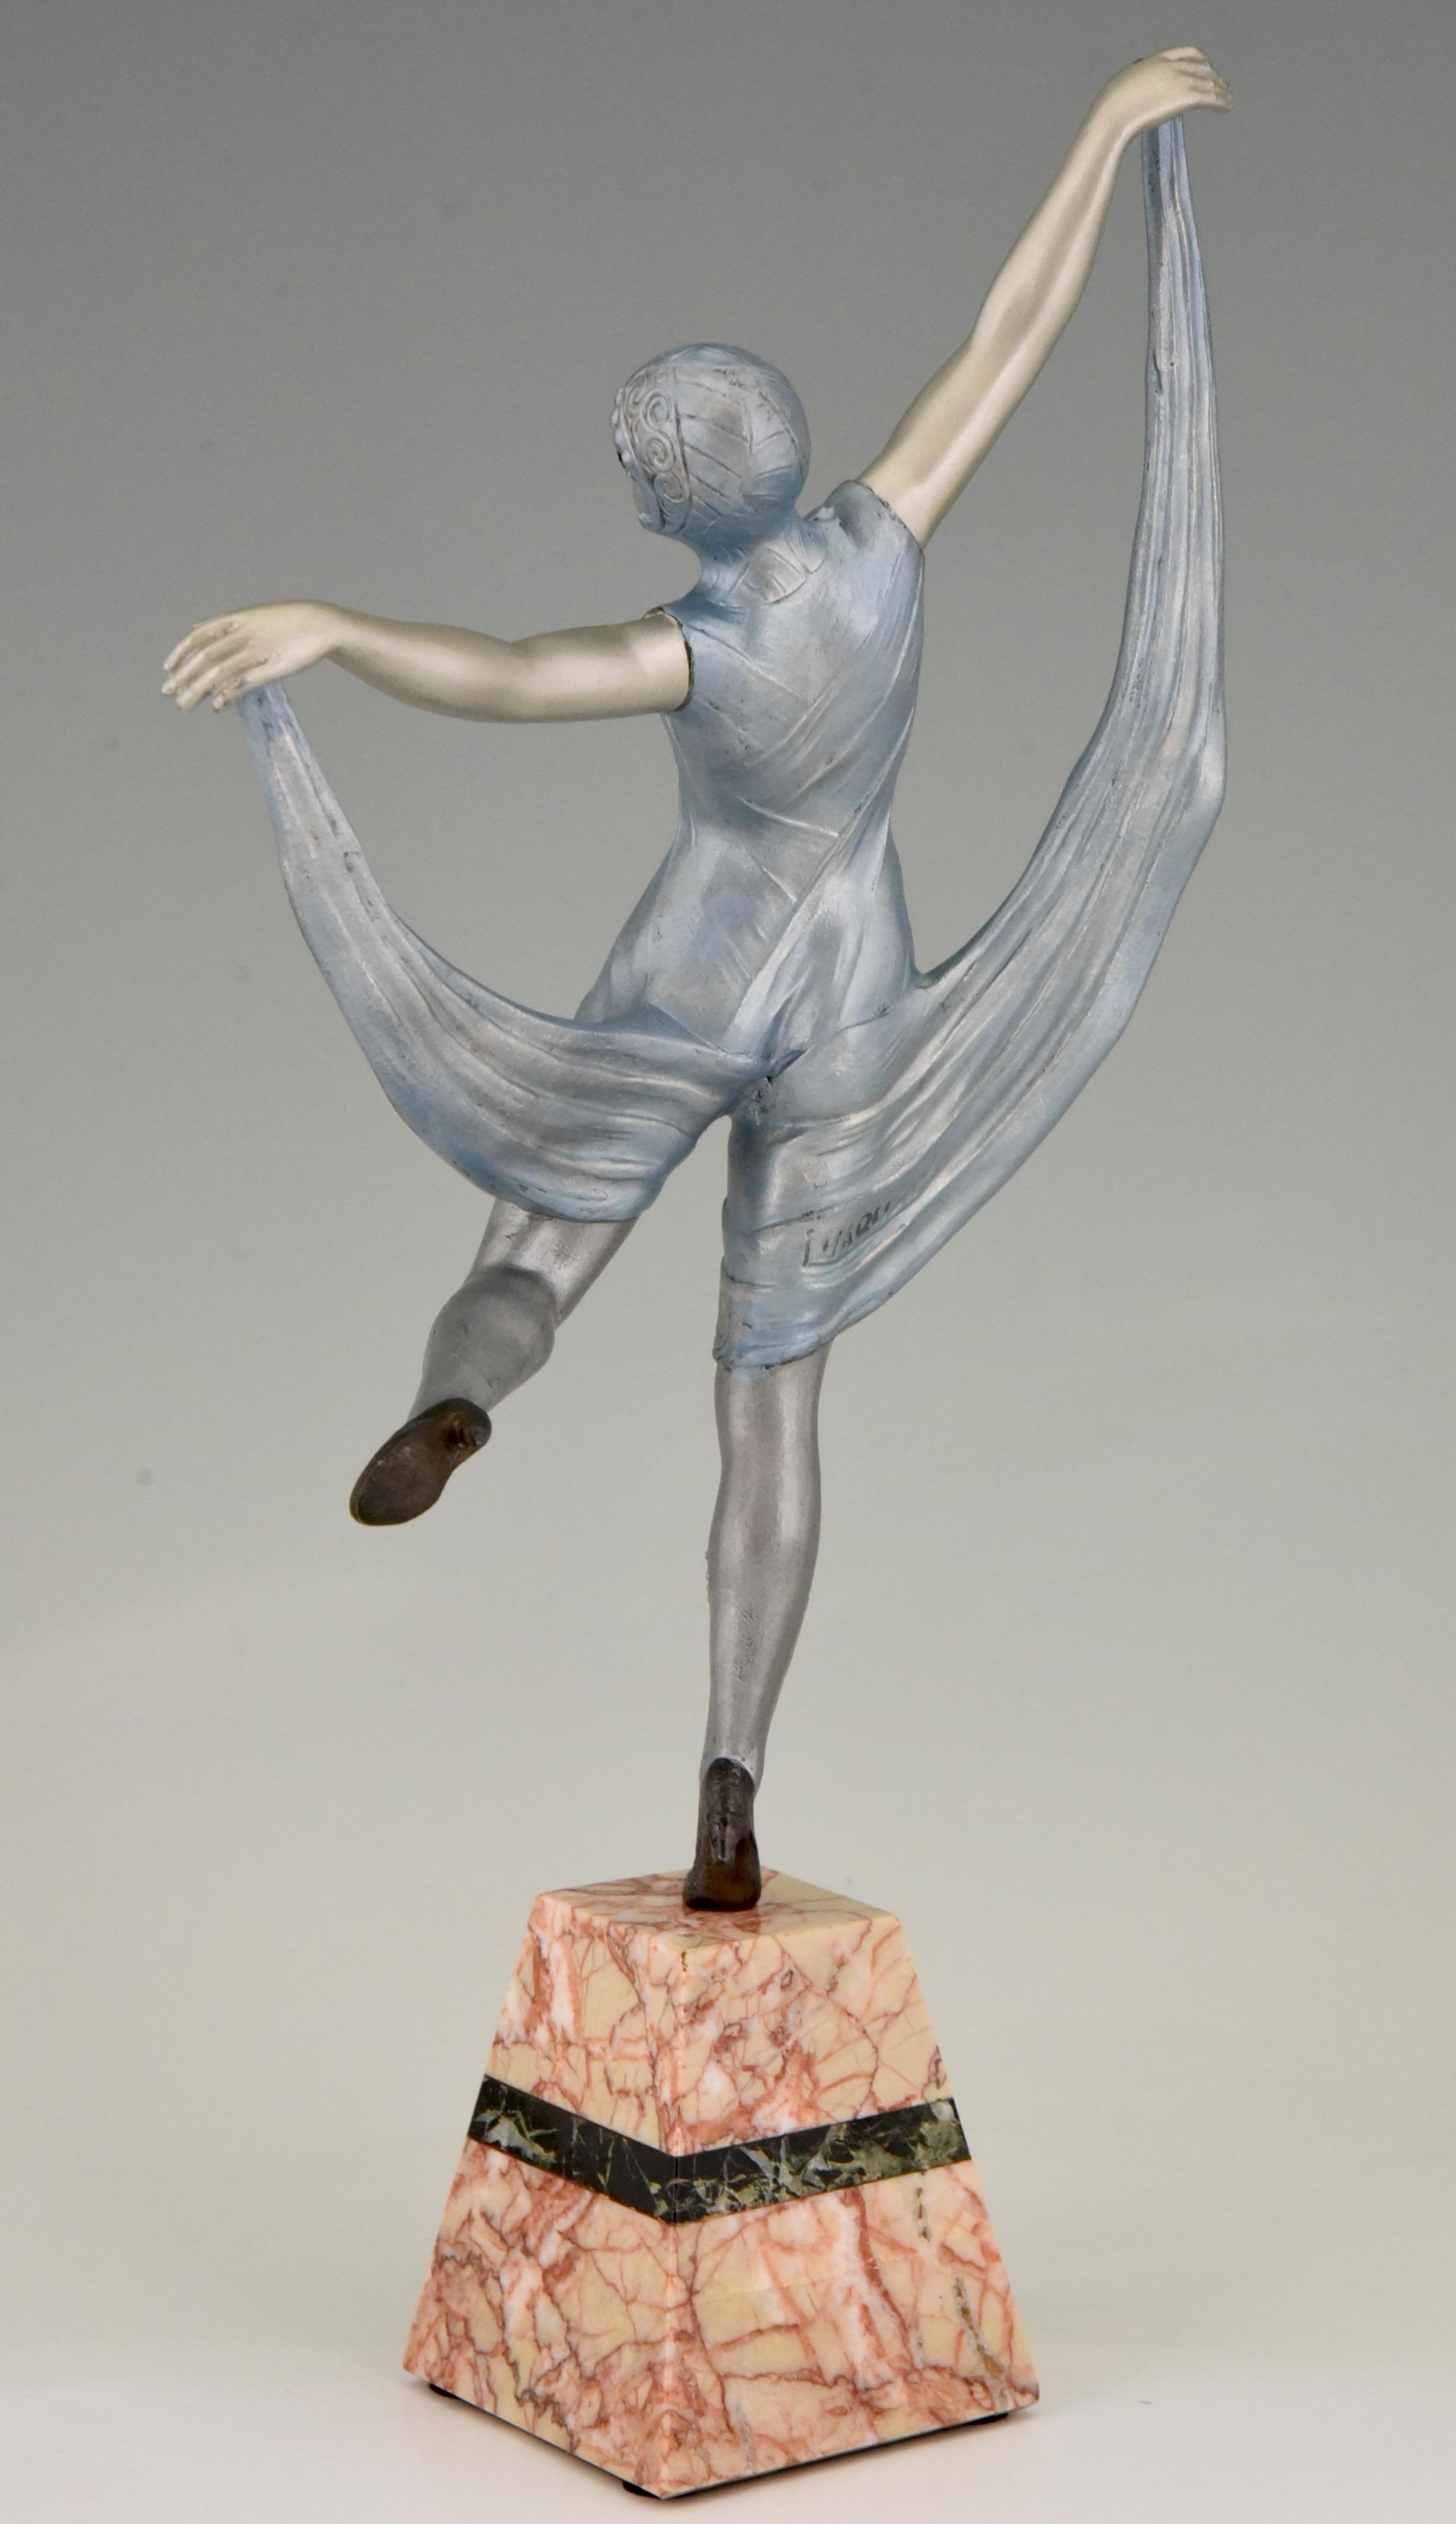 French Art Deco Sculpture of a Dancer Limousin, France, 1930